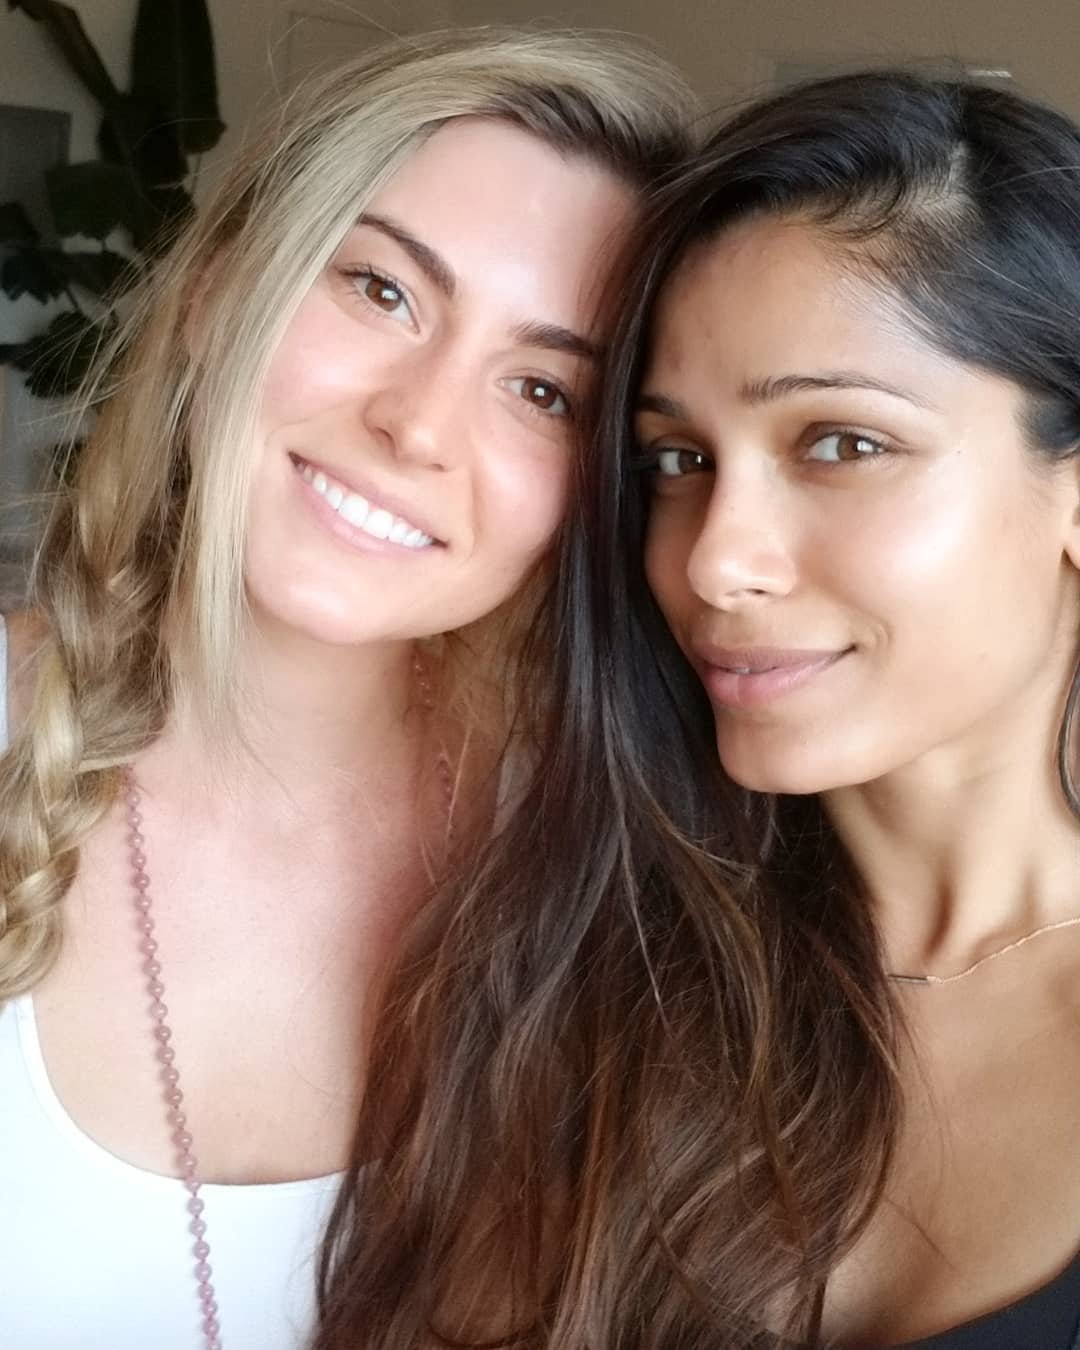 Freida Pinto has posted a photo on Instagram with the following remarks: My beautiful friend @rejuvenatewithnousha teaching me that a "post facial glow" is a perfect combination of the Inside and Out. Calming that anxiety and slowing down is just as important if not more when it comes to healing the body. Popping a pill is a temporary band aid ???? I tried her signature Reiki facial and the meditation was just the most beautiful part. Letting go off the toxins that clog the physical body and those stubborn and ridiculously deep set mental toxins that we call negativity, insecurities, fears, pressure, stress, low self esteem...now that was the REAL WORK. ???? And ultimately its down to you, to change the way you SEE YOURSELF. The constant self judgement and comparisons to other people's life, work, physical appearances, that is so greatly triggered on social media cannot and shouldn't get the better of you. I know Instagram is heavily used to post about "that perfect life" - dreamy sunsets, fancy clothes, all the wins and successes, crazy love, post workout taut bod etc etc. But the last few years I've been pondering the Imperfections and things we hesitate to post and how the picture perfect Insta life is just all A MYTH. Thank you Nousha for all your care and guidance. While my skin feels cared for, my mind feels even more clear and radiant. You are a gift!. Twitter, 2018-08-01 09:58:56. Photo supplied by insight media. Service fee applies. NICHT ZUR VERÃFFENTLICHUNG IN BÃCHERN UND BILDBÃNDEN! EDITORIAL USE ONLY! / MAY NOT BE PUBLISHED IN BOOKS AND ILLUSTRATED BOOKS! Please note: Fees charged by the agency are for the agencyâs services only, and do not, nor are they intended to, convey to the user any ownership of Copyright or License in the material. The agency does not claim any ownership including but not limited to Copyright or License in the attached material. By publishing this material you expressly agree to indemnify and to hold the agency and its directors, shareholders and employees harmless from any loss, claims, damages, demands, expenses (including legal fees), or any causes of action or allegation against the agency arising out of or connected in any way with publication of the material., Image: 380541625, License: Rights-managed, Restrictions: NICHT ZUR VERÃFFENTLICHUNG IN BÃCHERN UND BILDBÃNDEN! Please note additional conditions in the caption, Model Release: no, Credit line: Profimedia, Insight Media